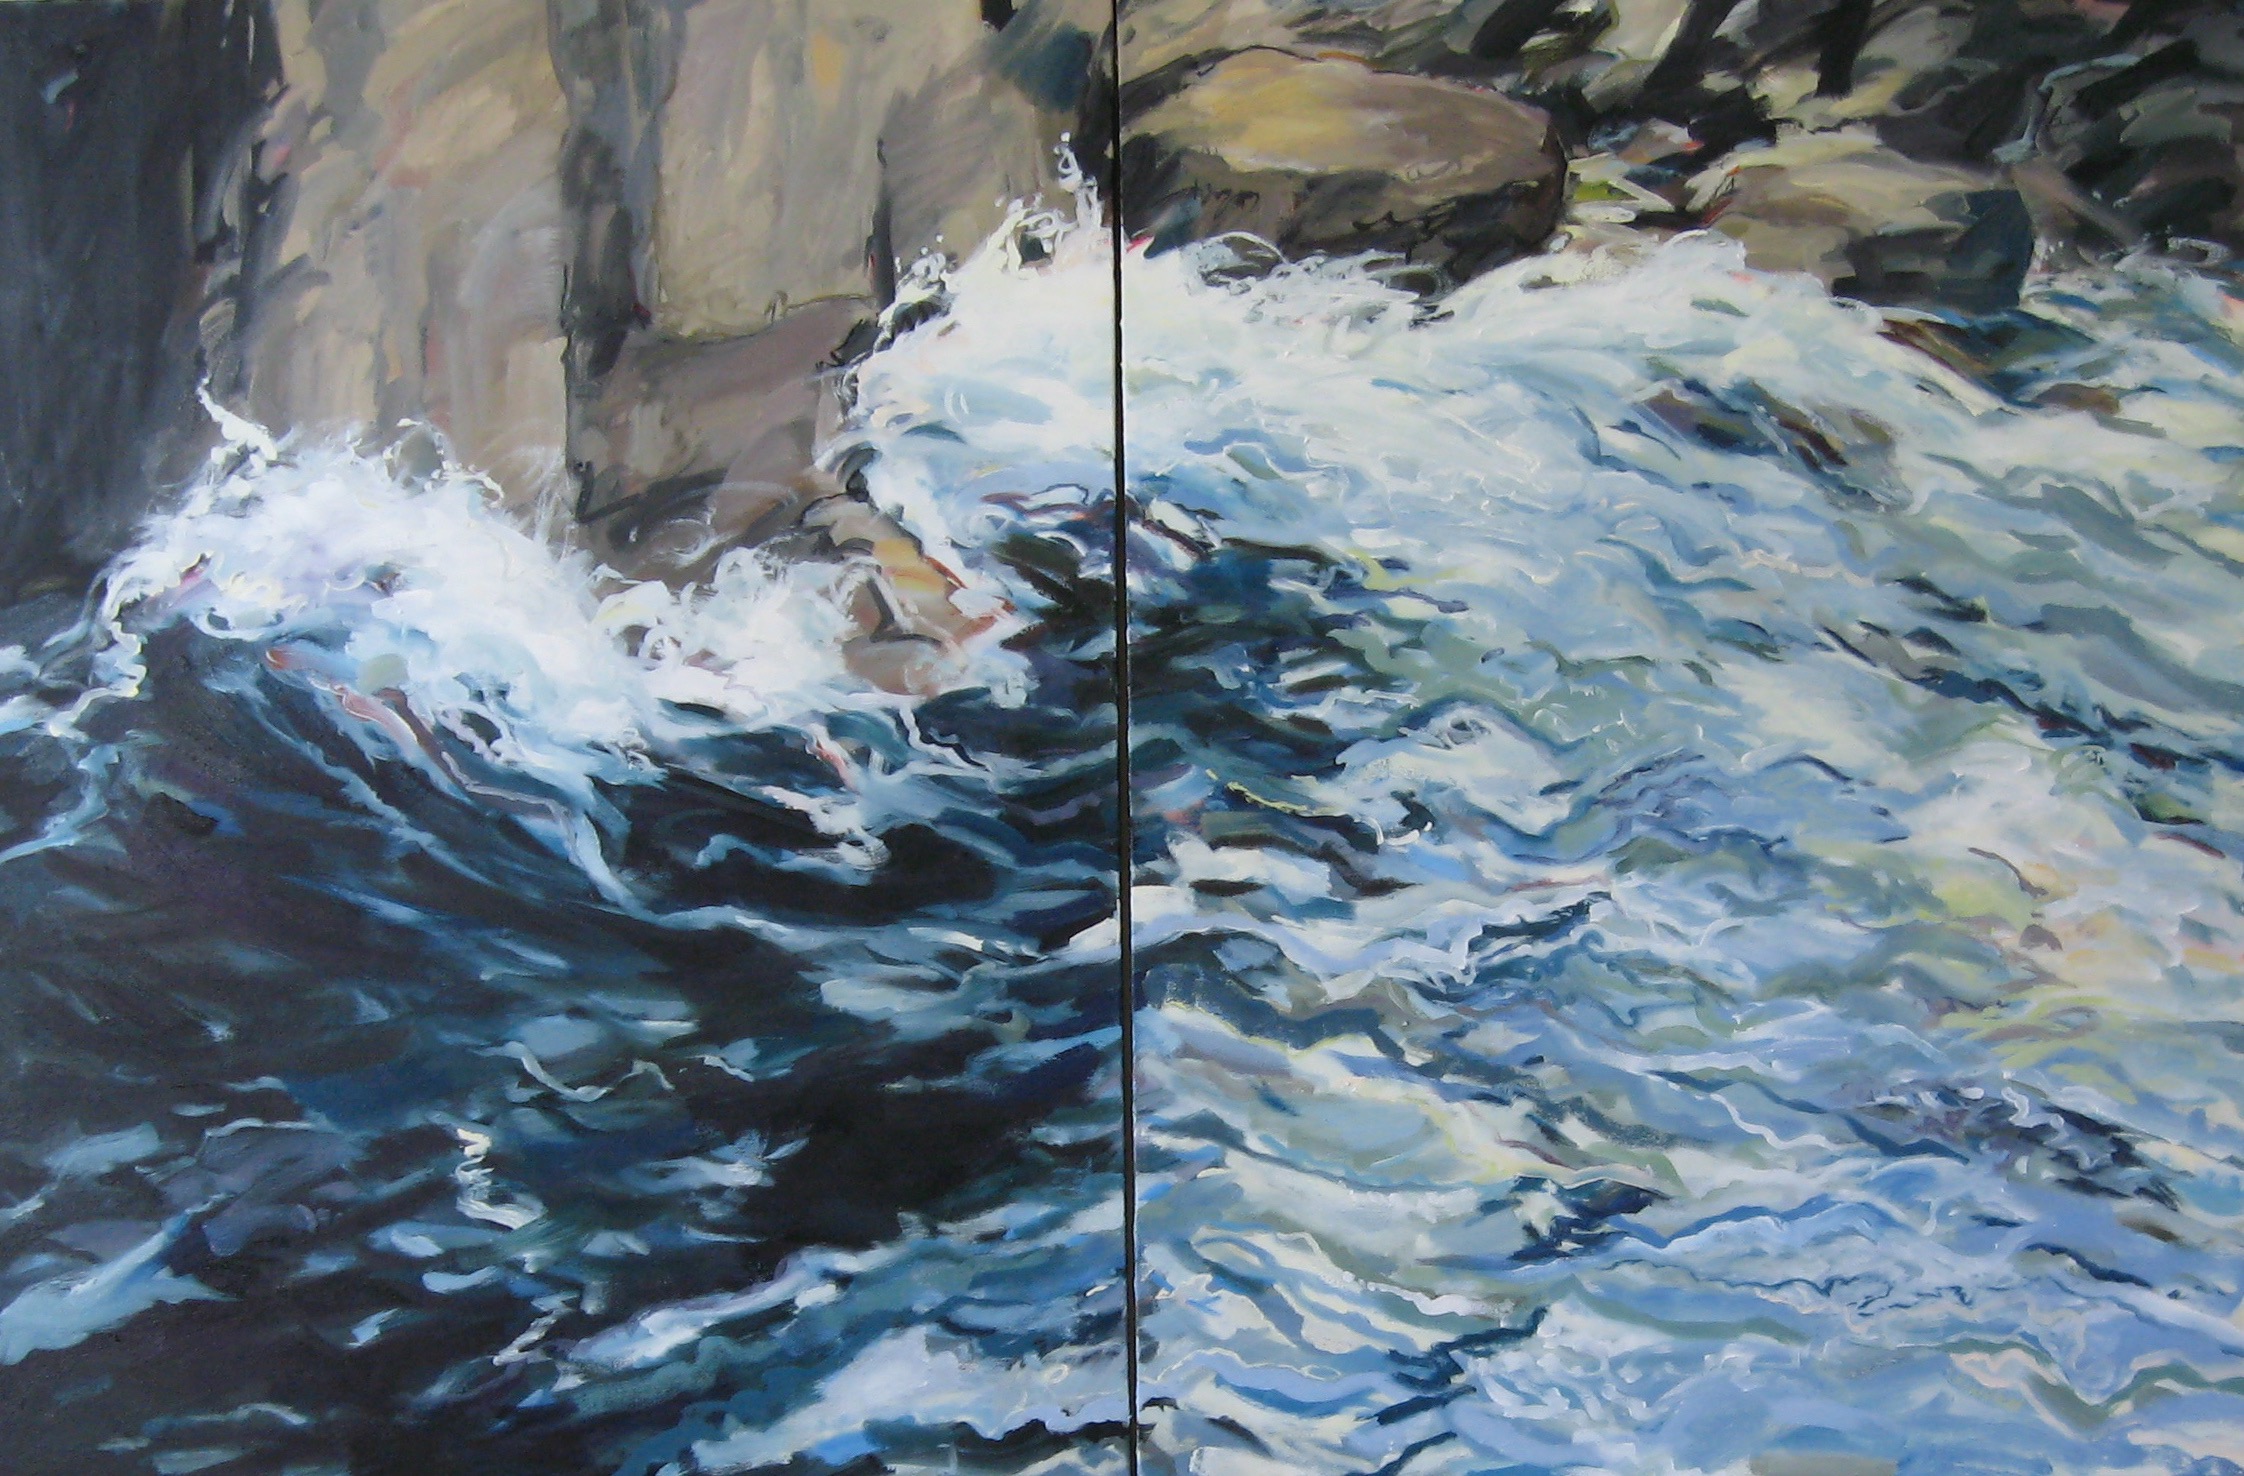 Wave #12, diptych, 60 x 40", Oil